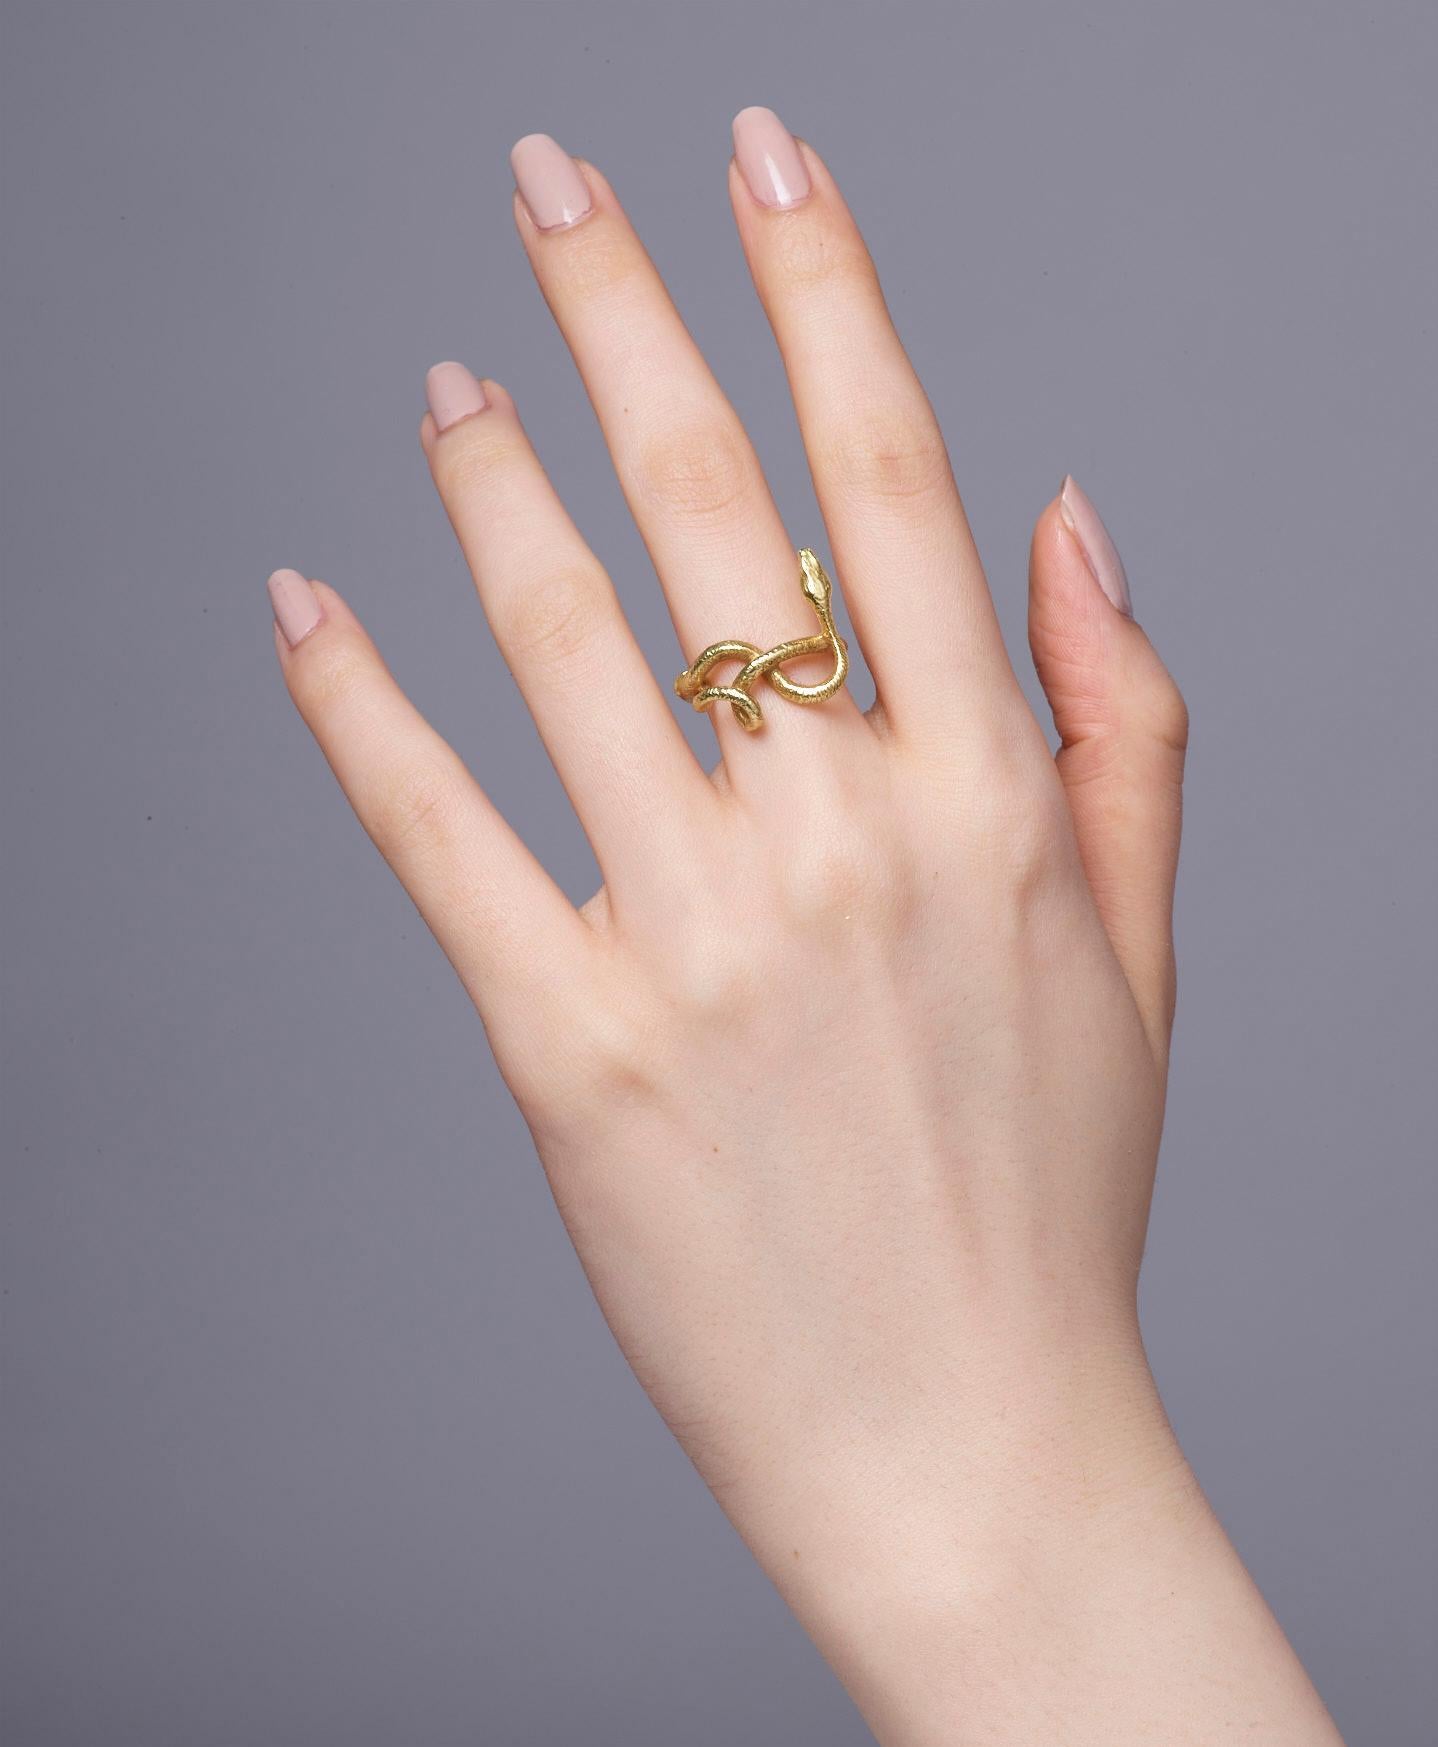 The wadjet twists and turns as it encircles your finger protecting you at every turn. A symbol of sovereignty, royalty and divine authority the snake will guide you on your life path as you shed your skin on the journey of rebirth.  

Your ring will